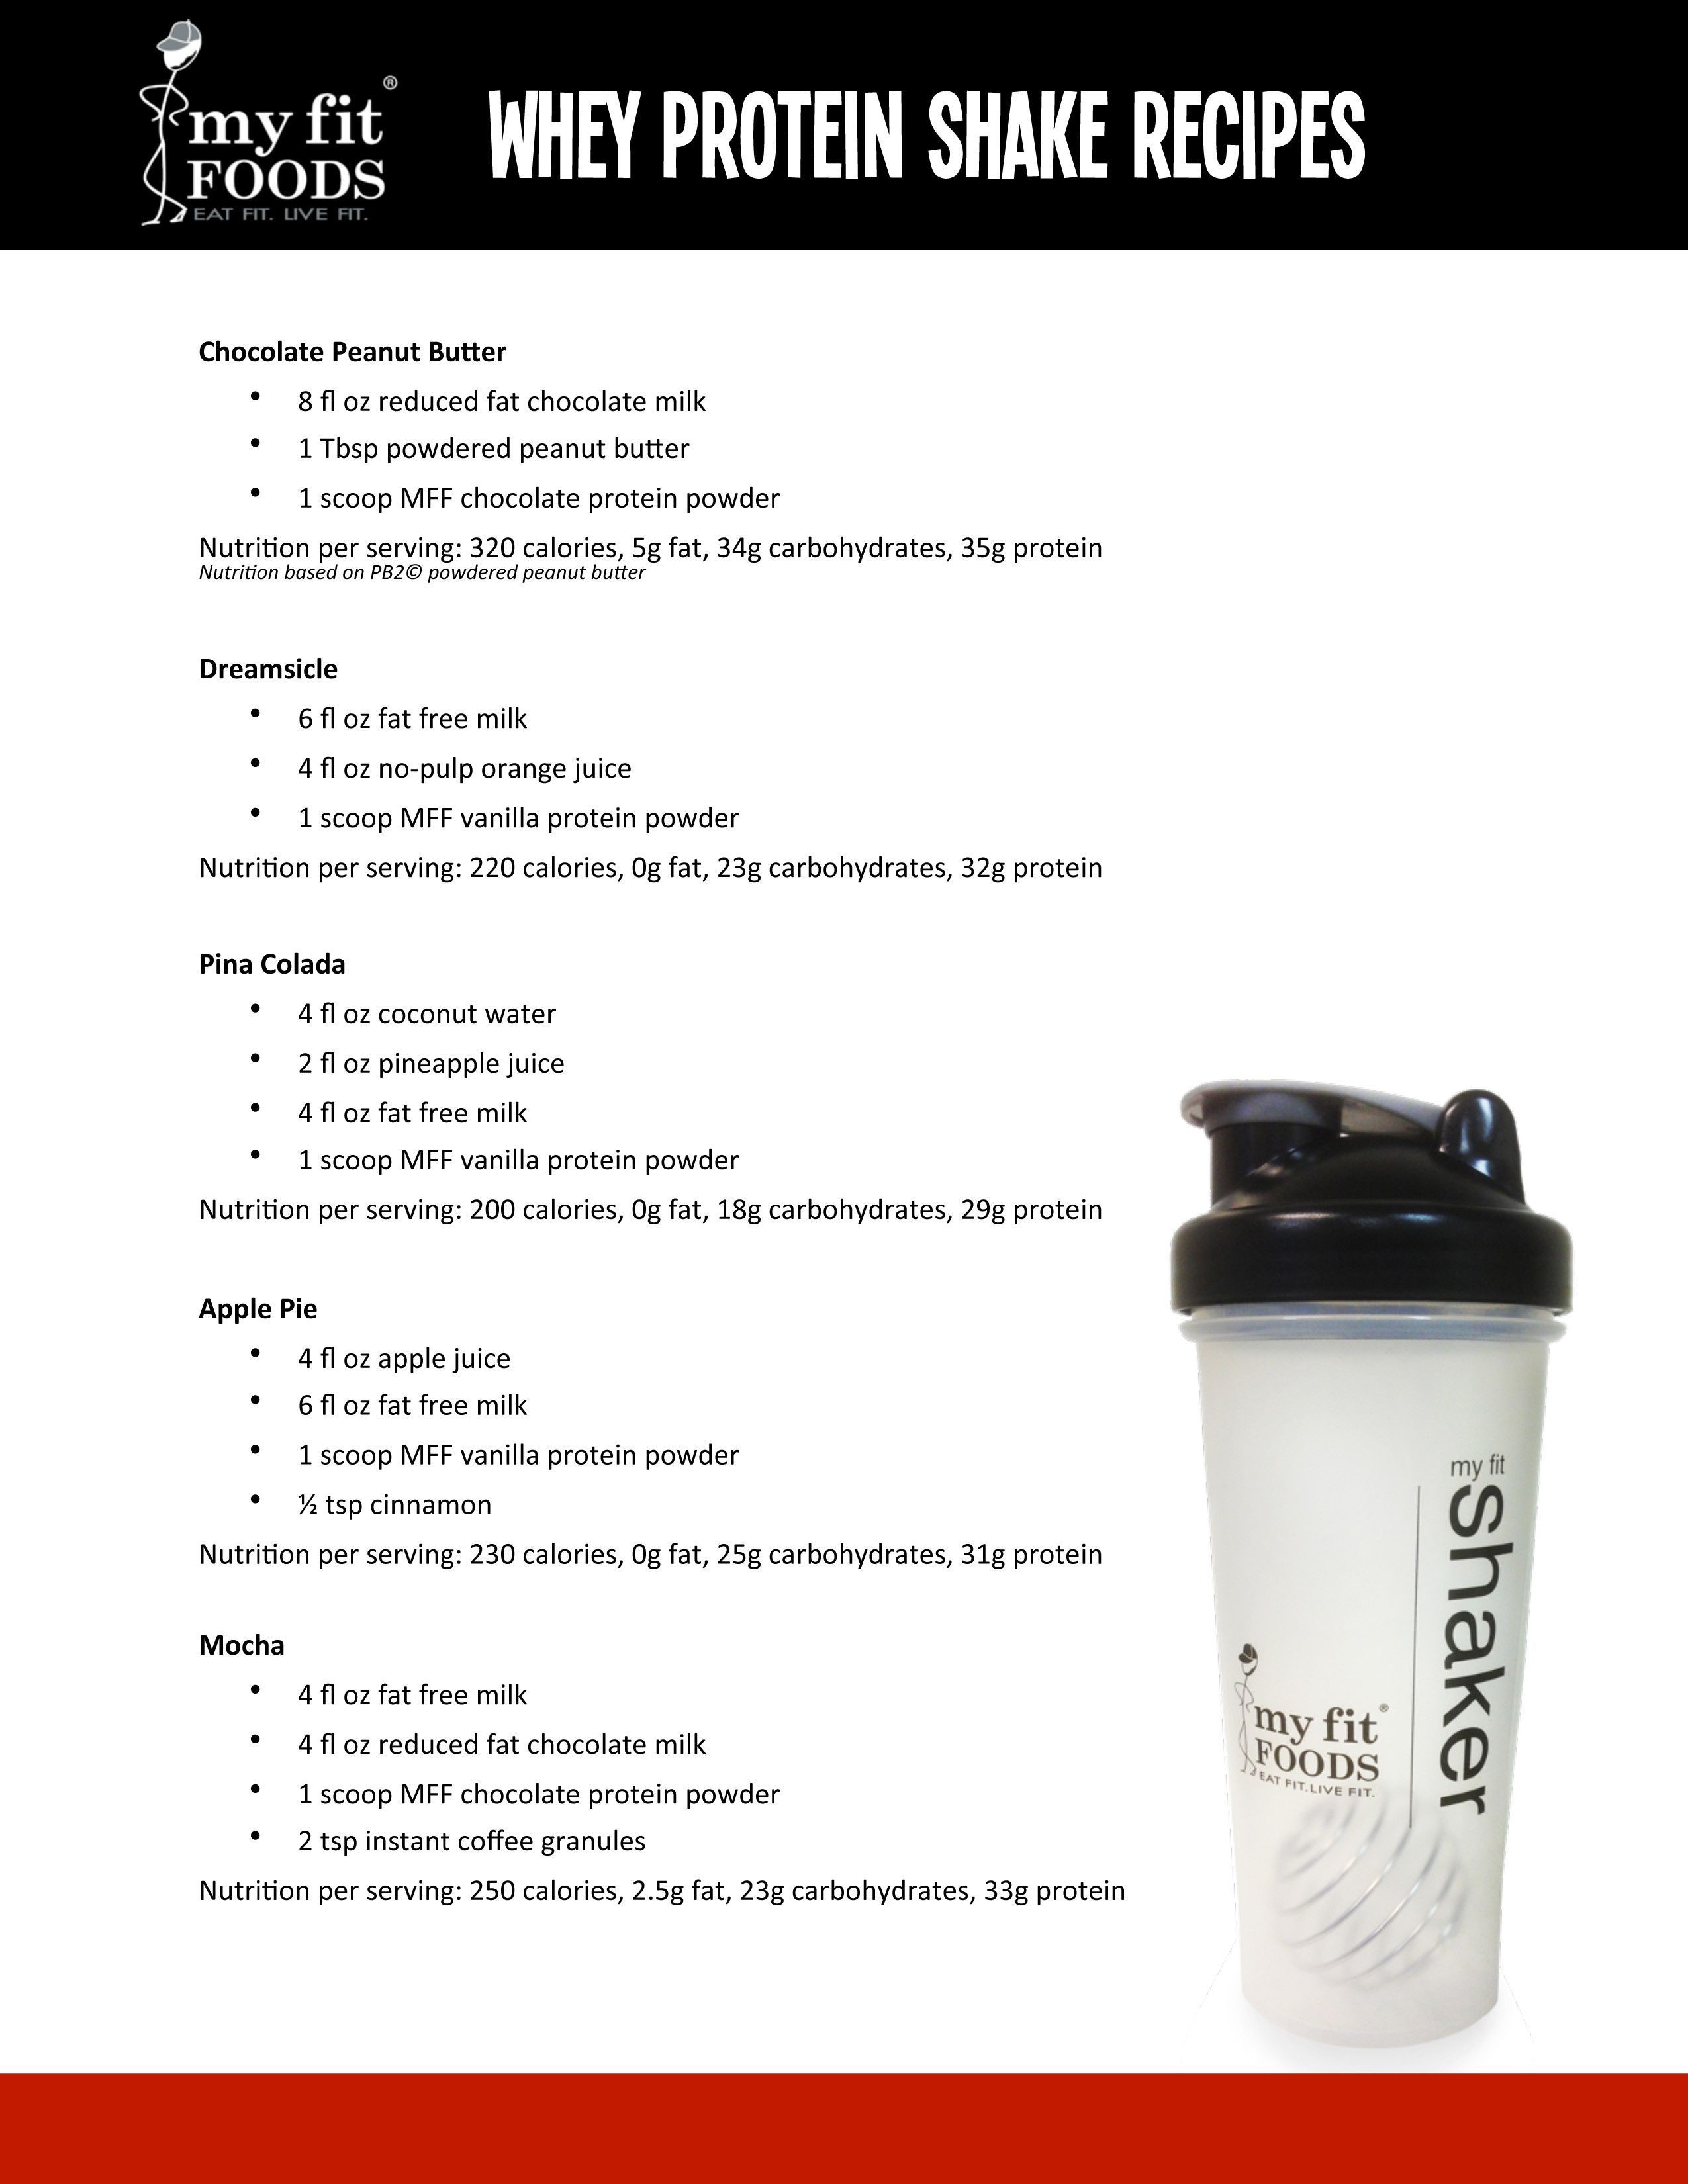 My Fit Foods Protein Shake Recipes – meal replacement or Olivias recipes.